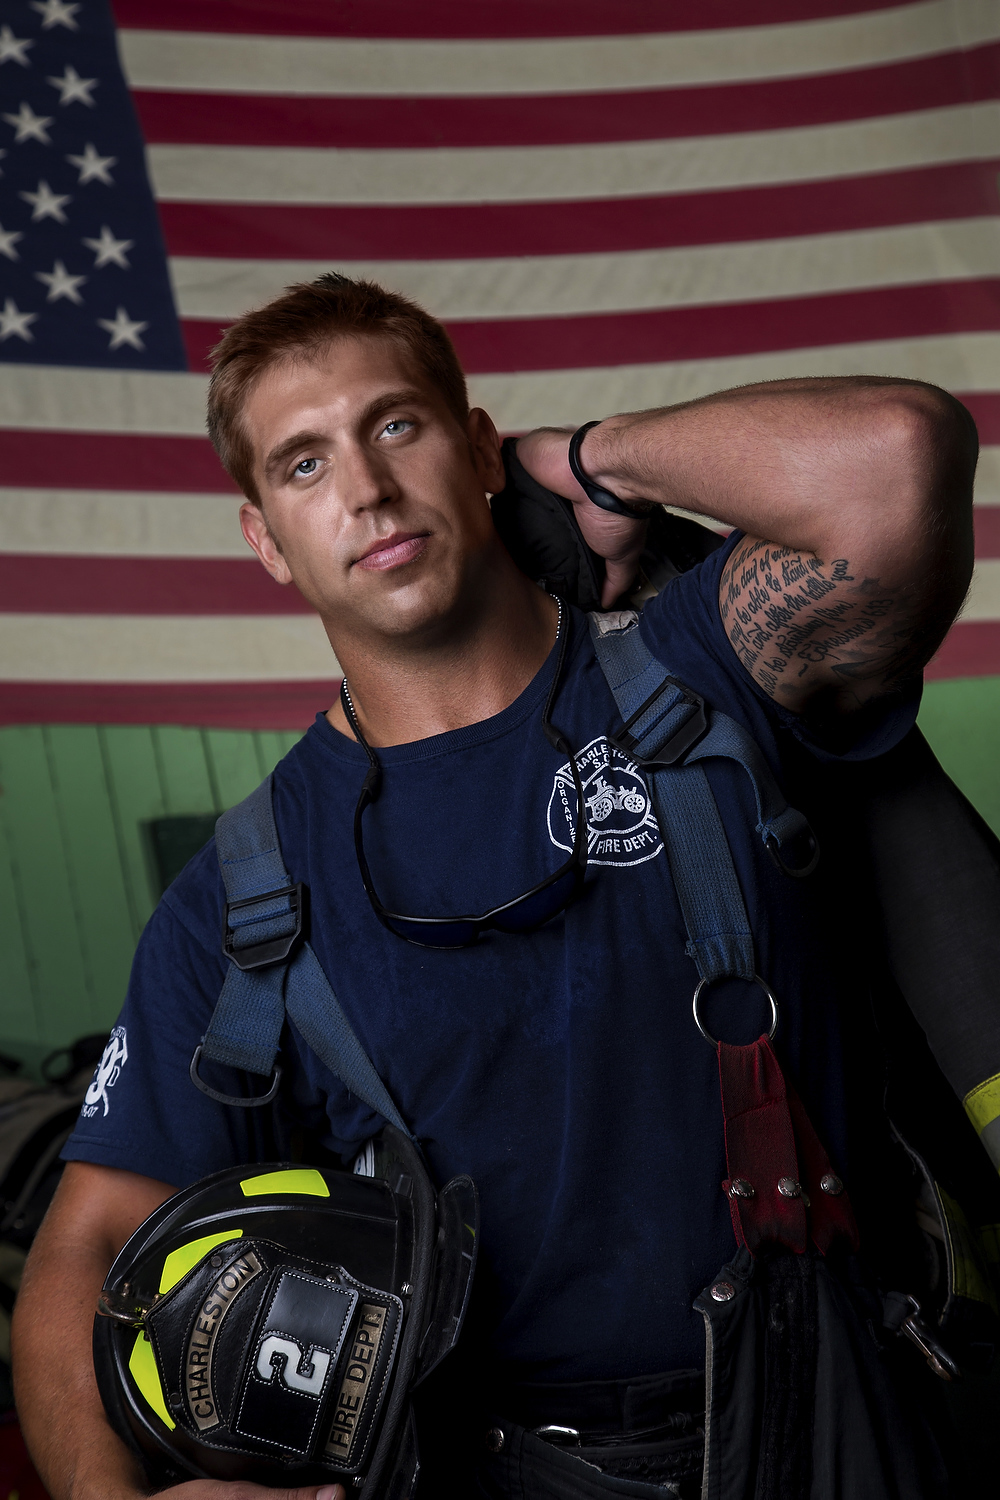  A fireman with the Charleston fire department poses for a portrait. 